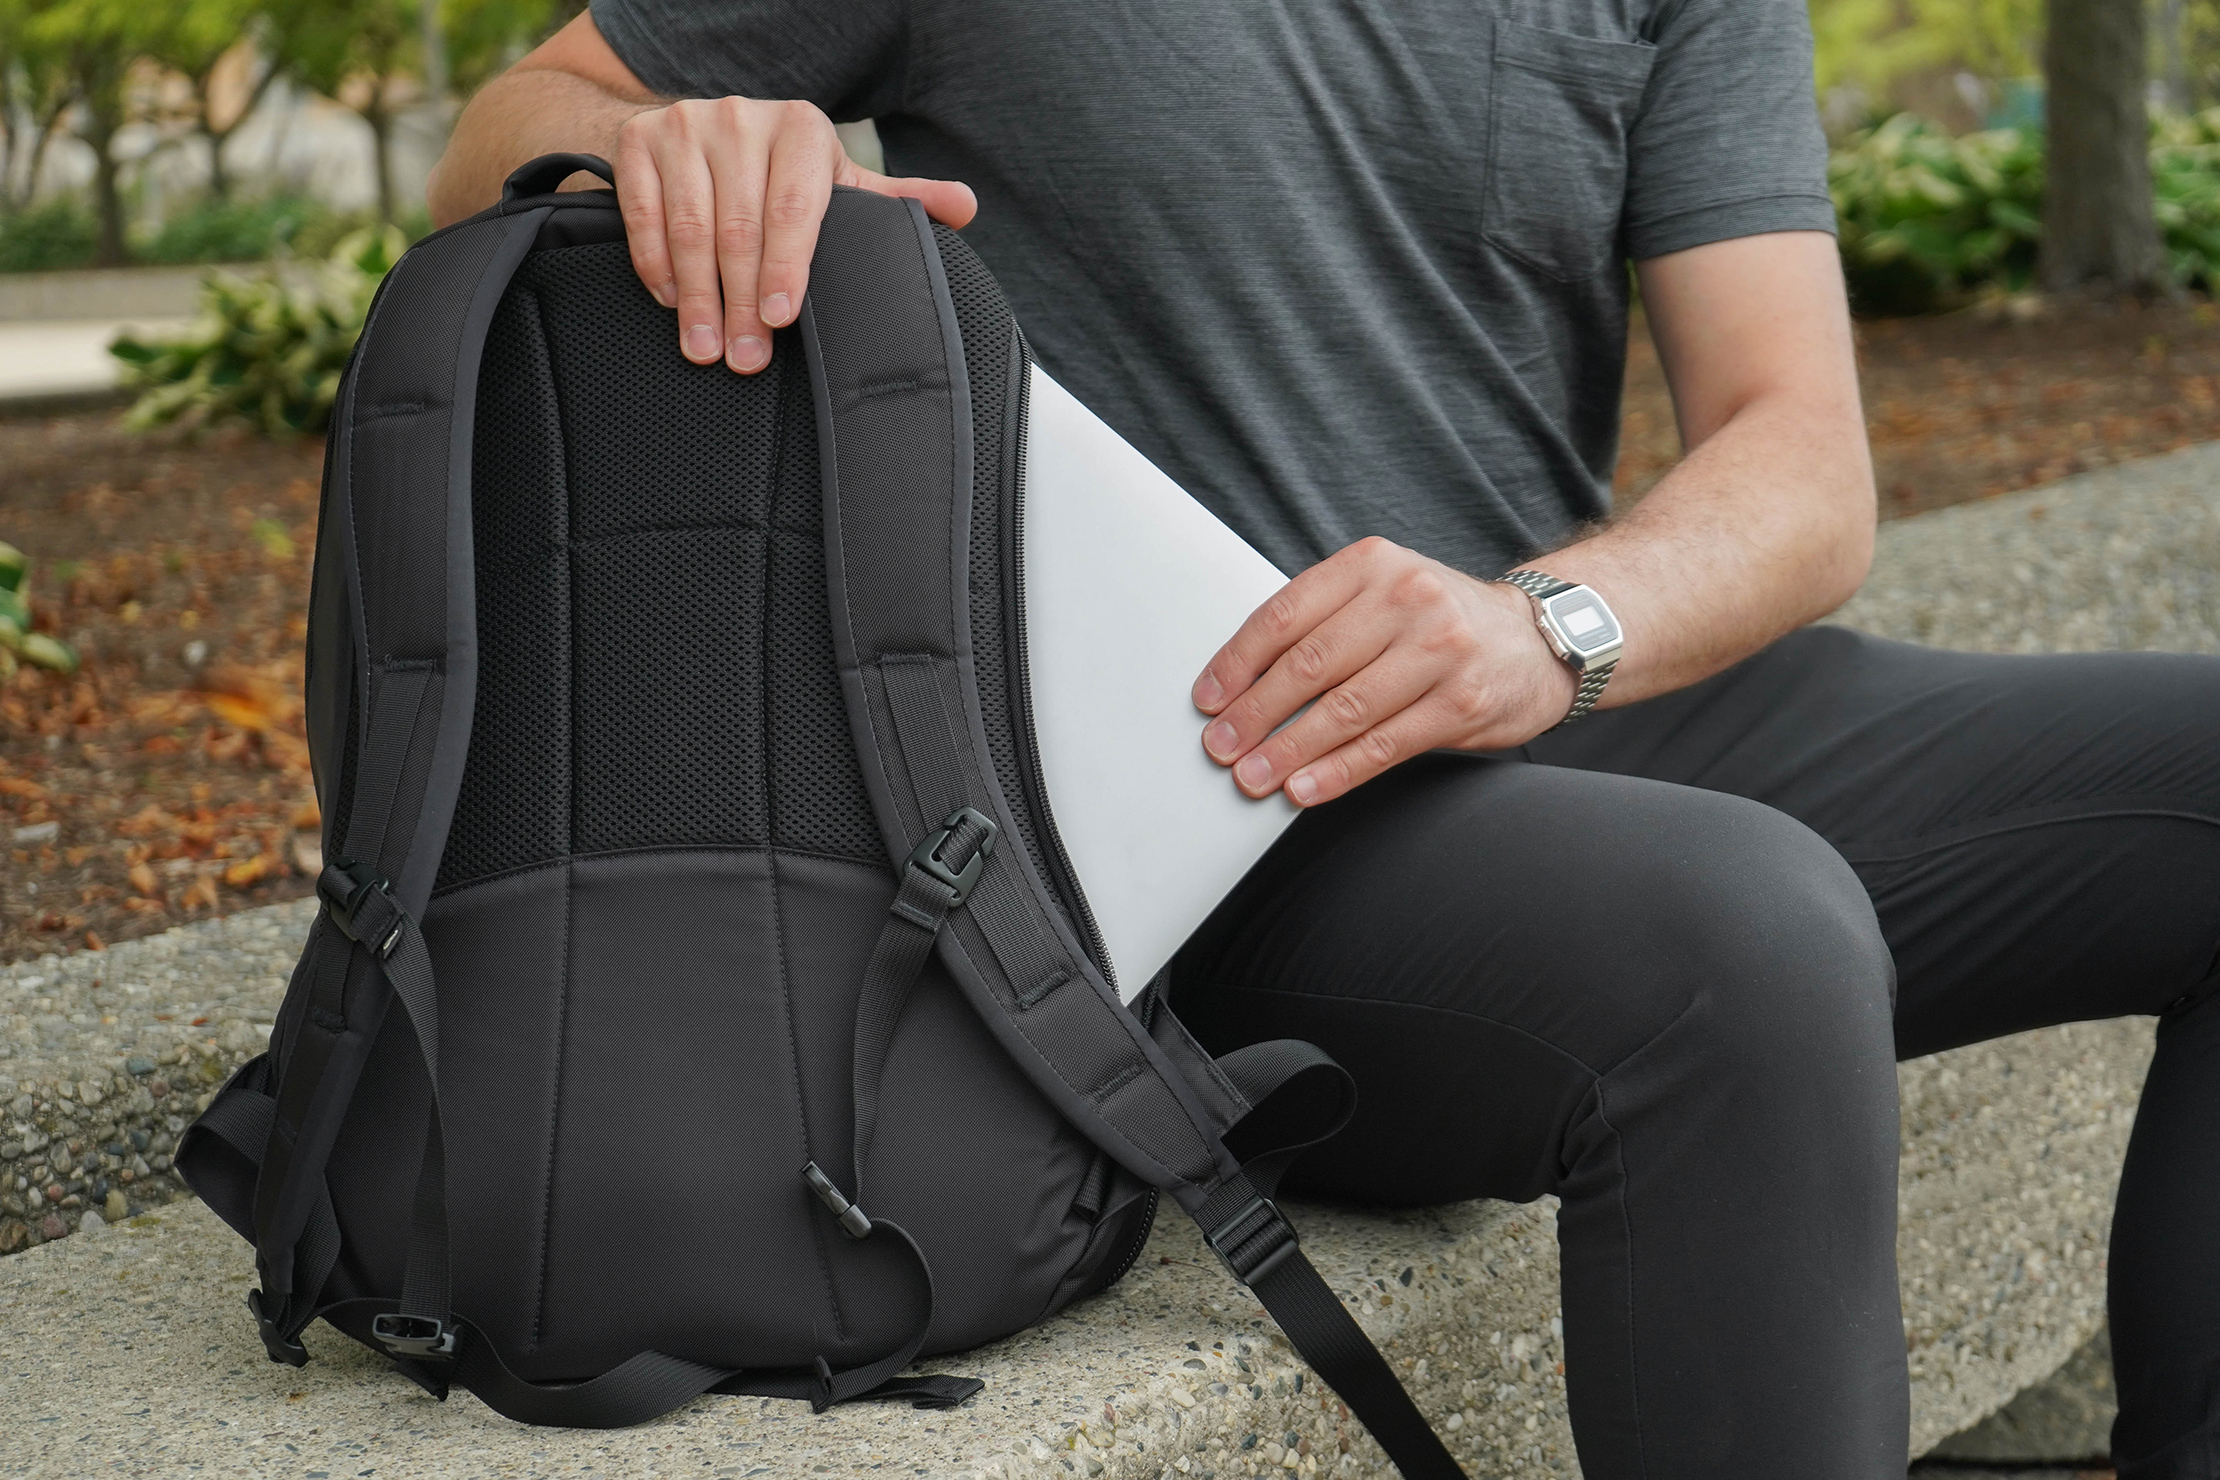 2019 BestSelling 19 20 Inch Laptop Backpack Bag  China Laptop Bag and Laptop  Bags price  MadeinChinacom